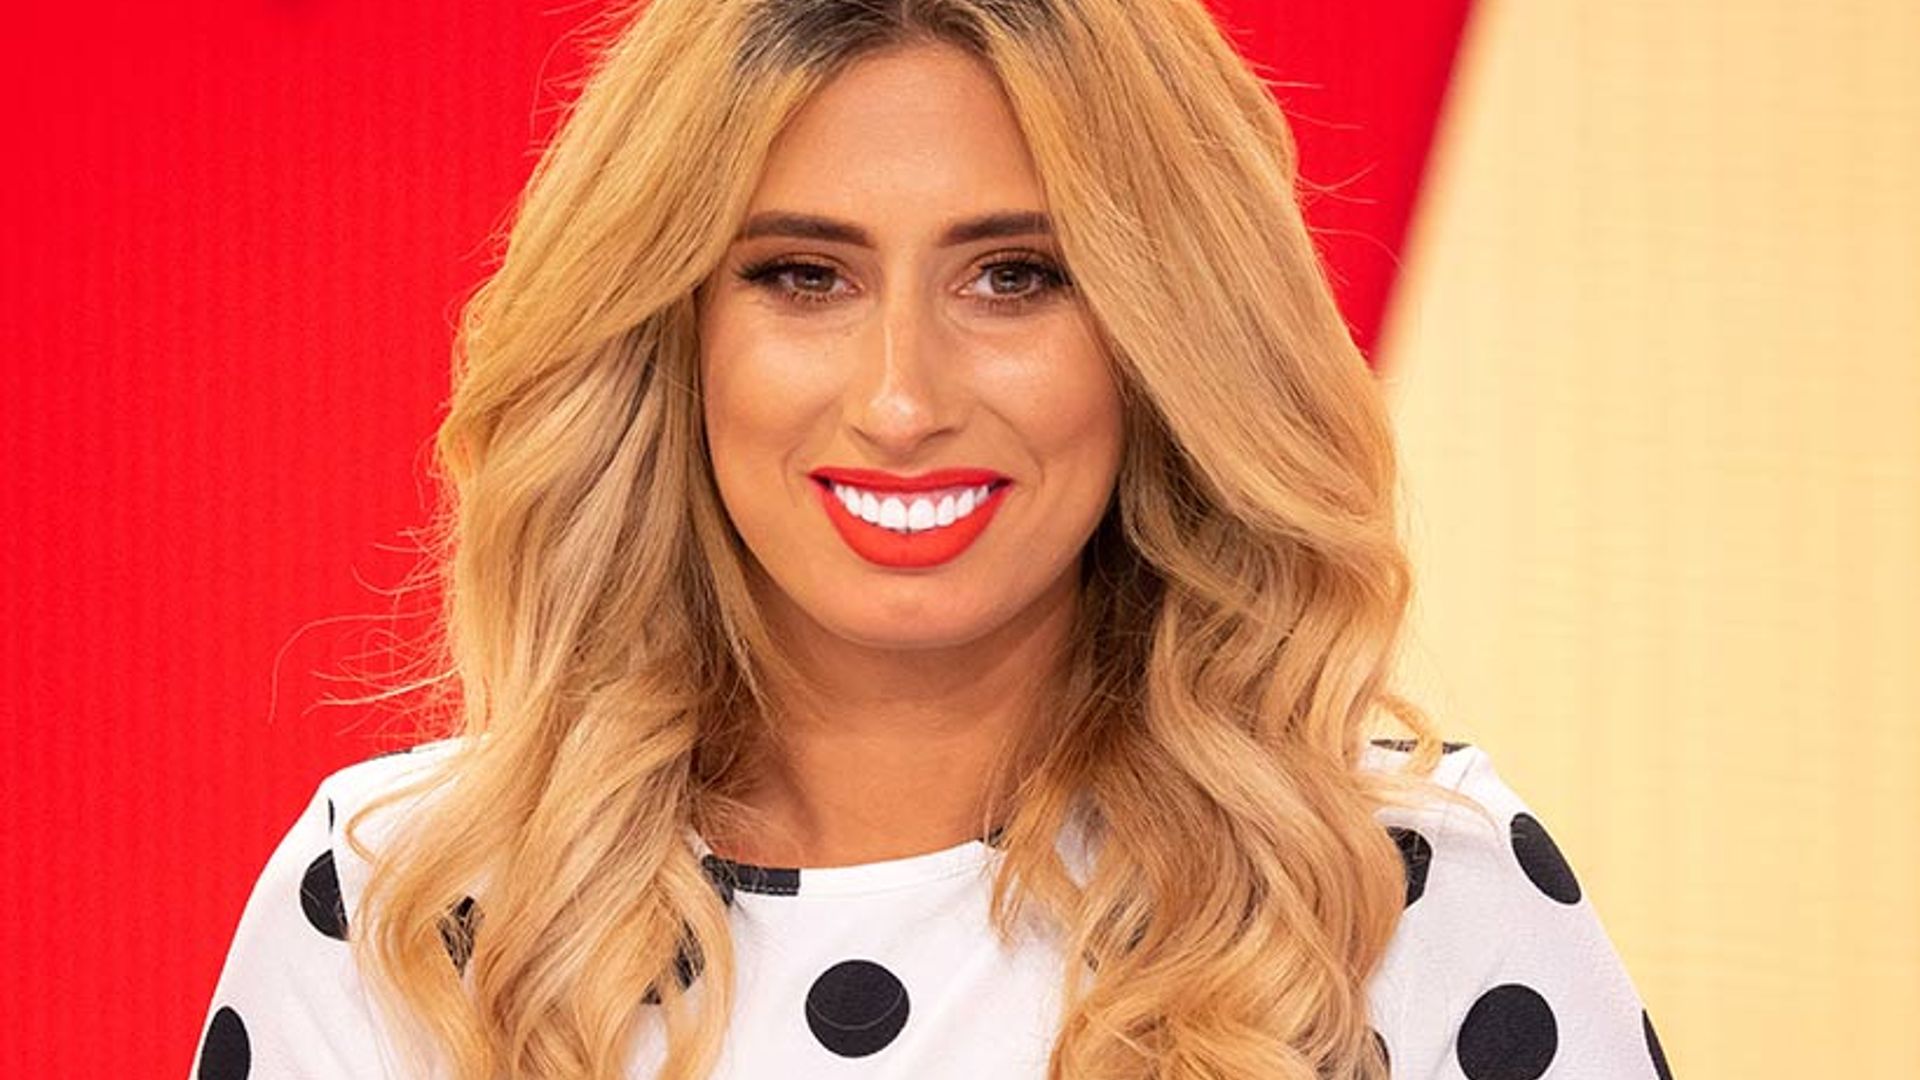 Stacey Solomon's pink leopard print dress is one of the most gorgeous outfits we have seen her in